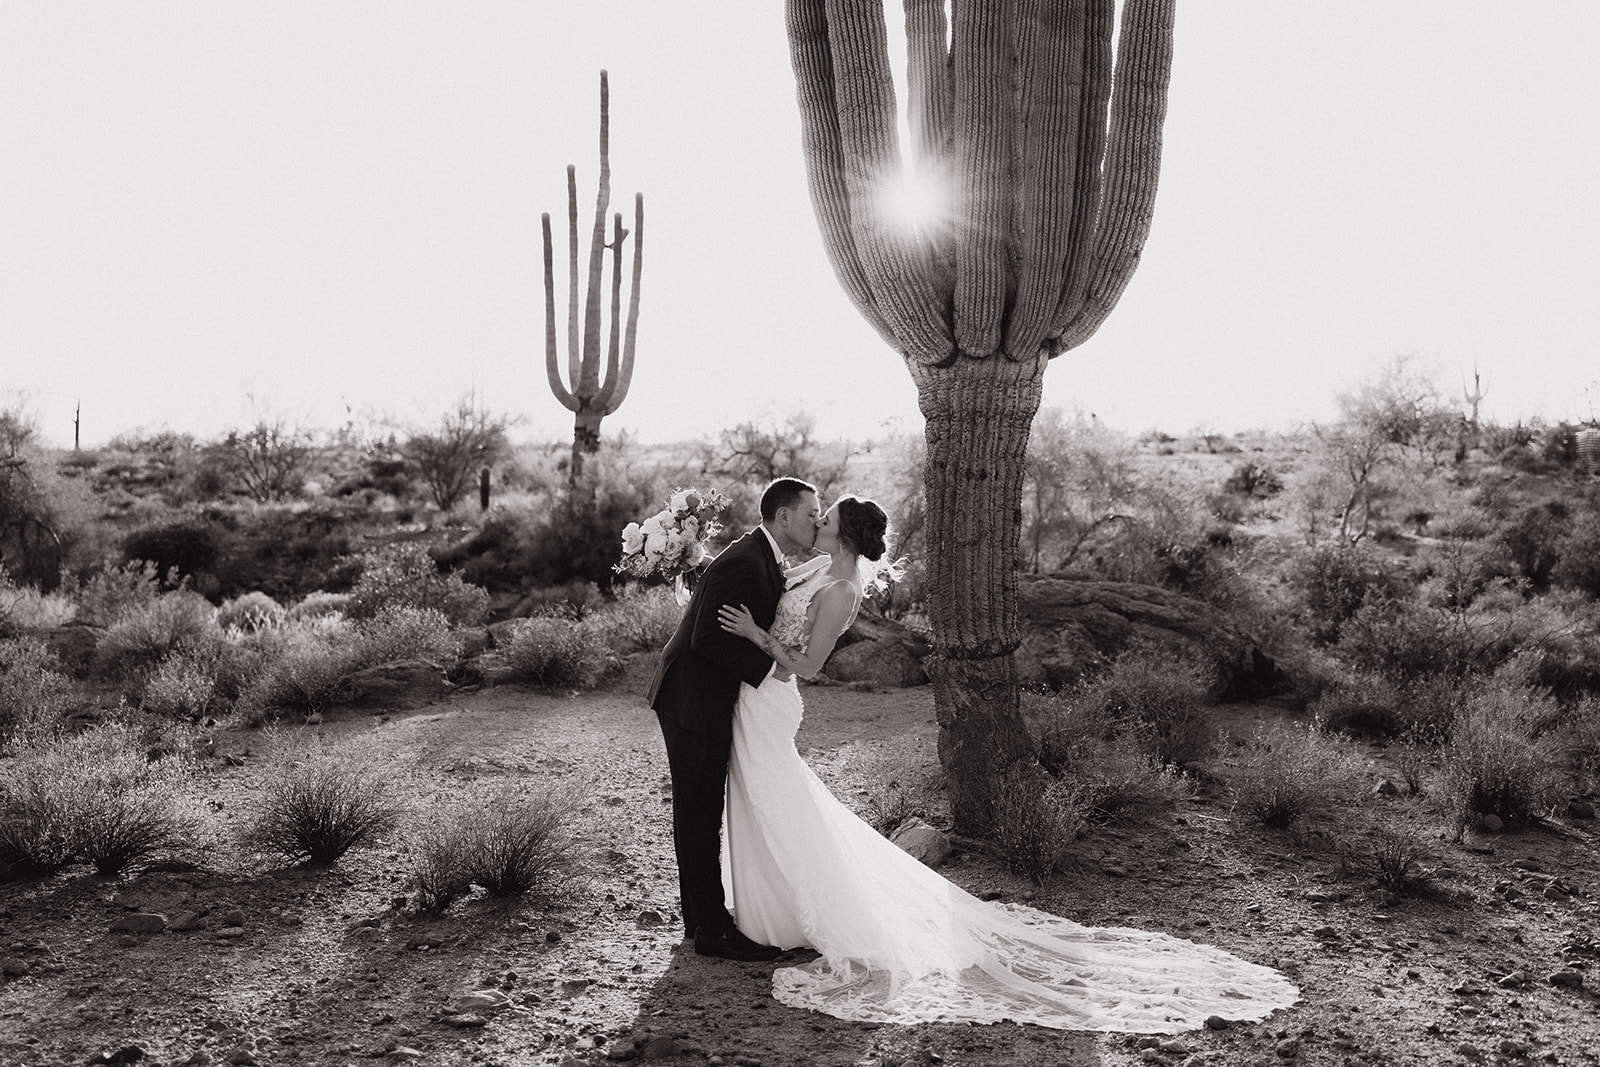 Stunning bride and groom pose in the desert after their stunning Arizona wedding